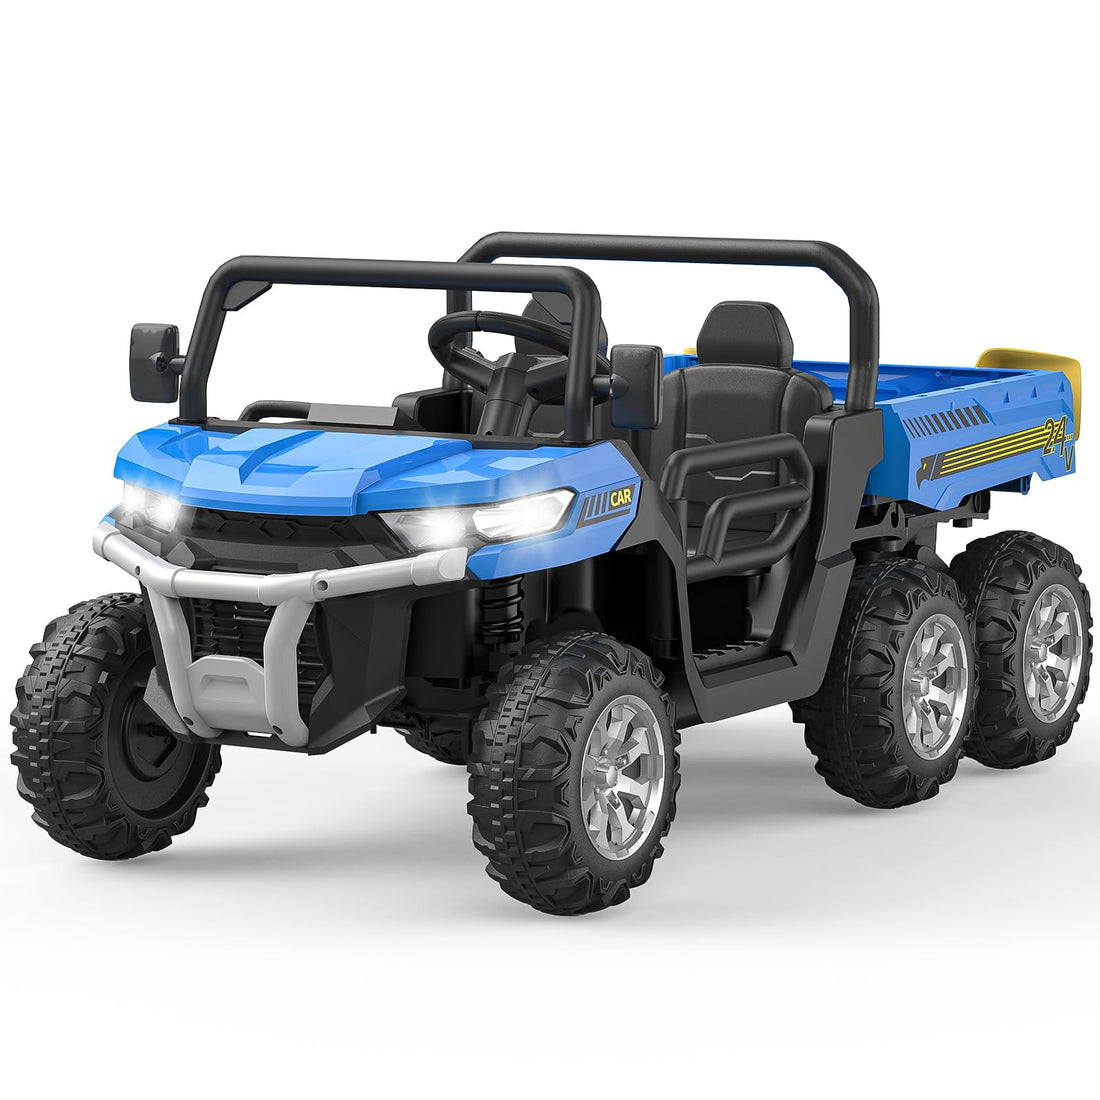 2-Seater Ride on Car,6X6 24V Kids Ride On Dump Truck with Remote Control Electric Utility Vehicles UTV Battery Powered 6 Wheeler with EVA Tires Wheels(Ship in 2 Boxes) Blue (Copy)